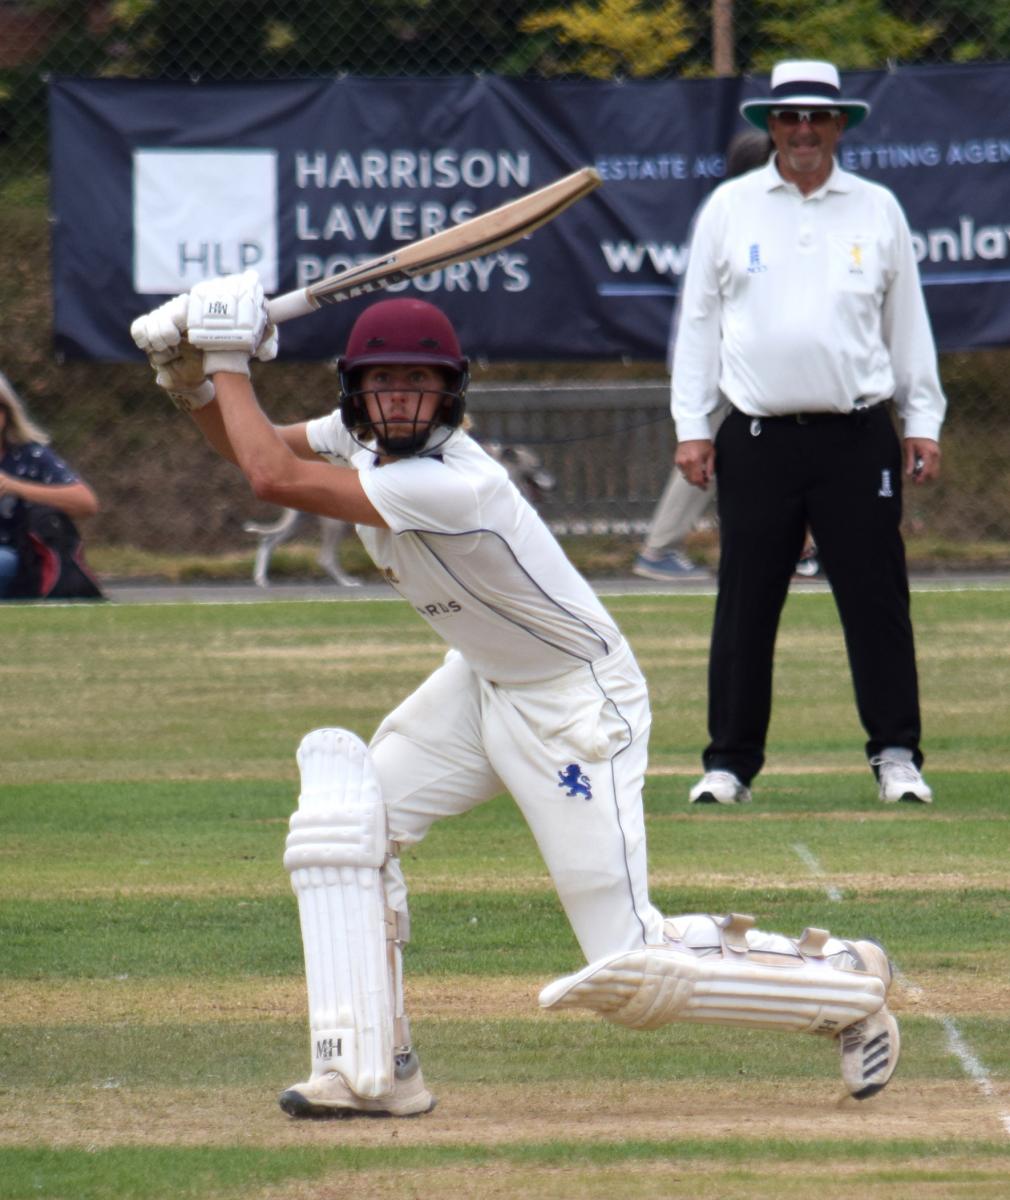 Elliot Hamilton drills a boundary down the hill at Sidmouth